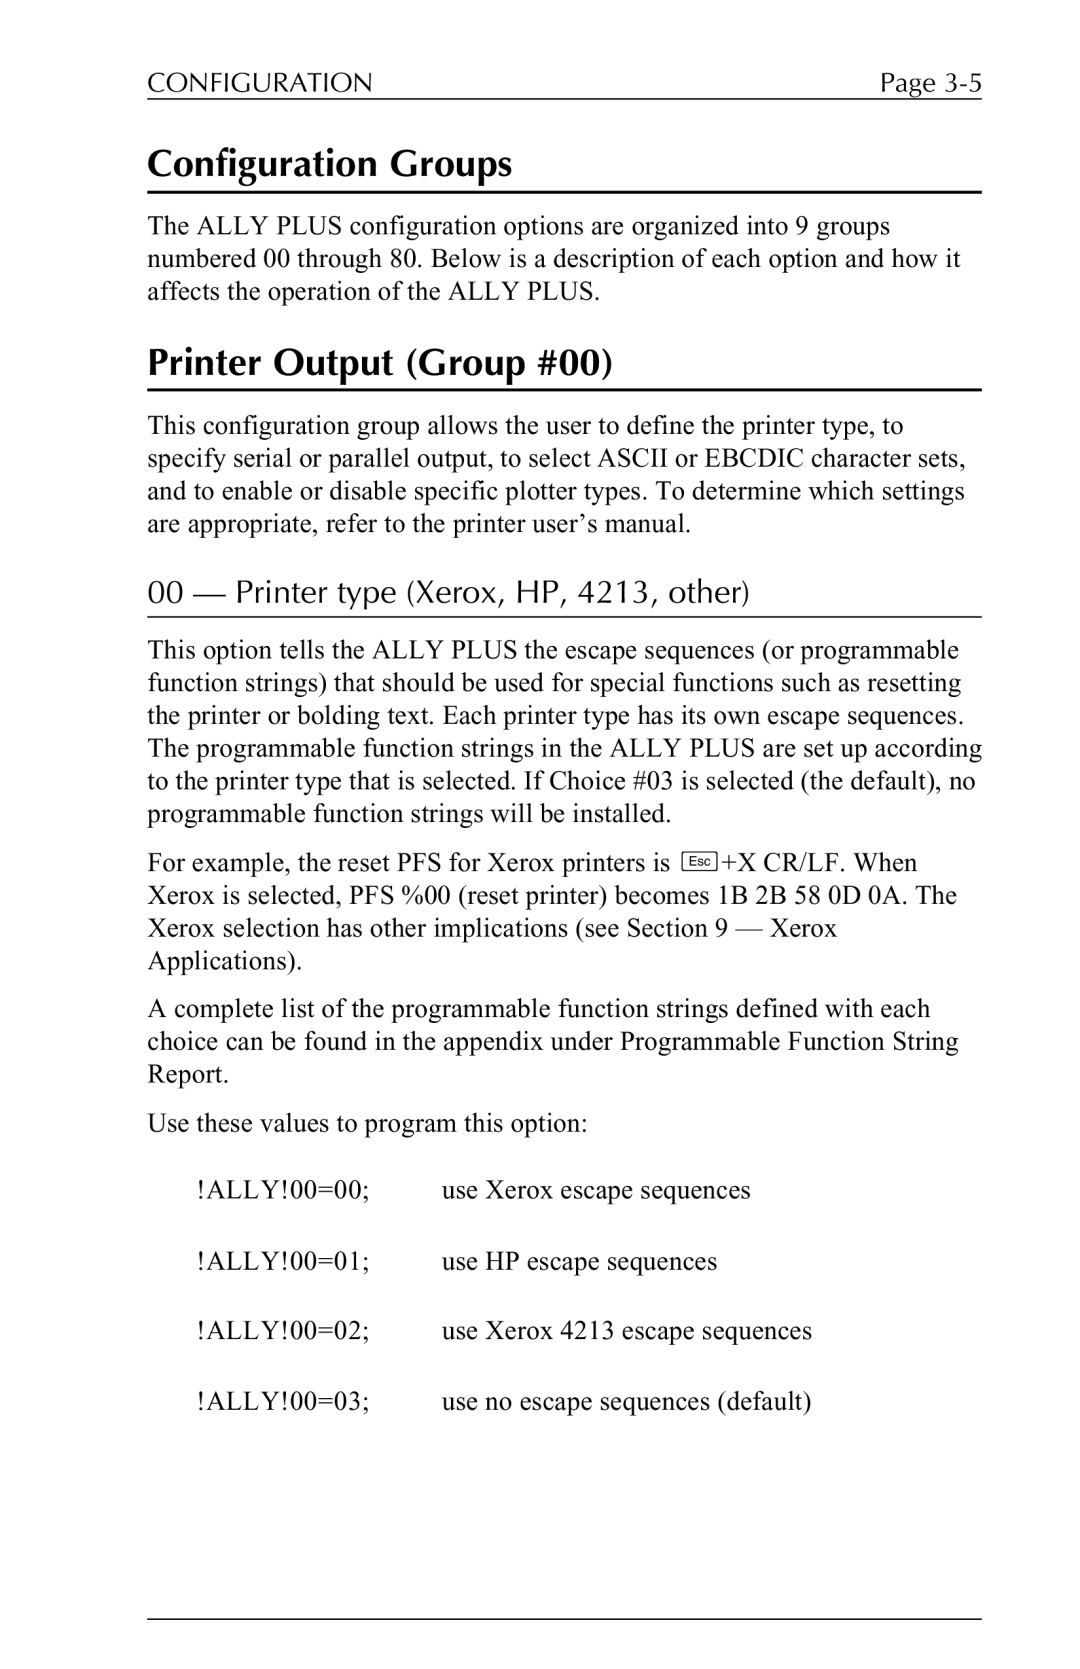 Xerox 6287 user manual Configuration Groups, Printer Output Group #00, Printer type Xerox, HP, 4213, other 